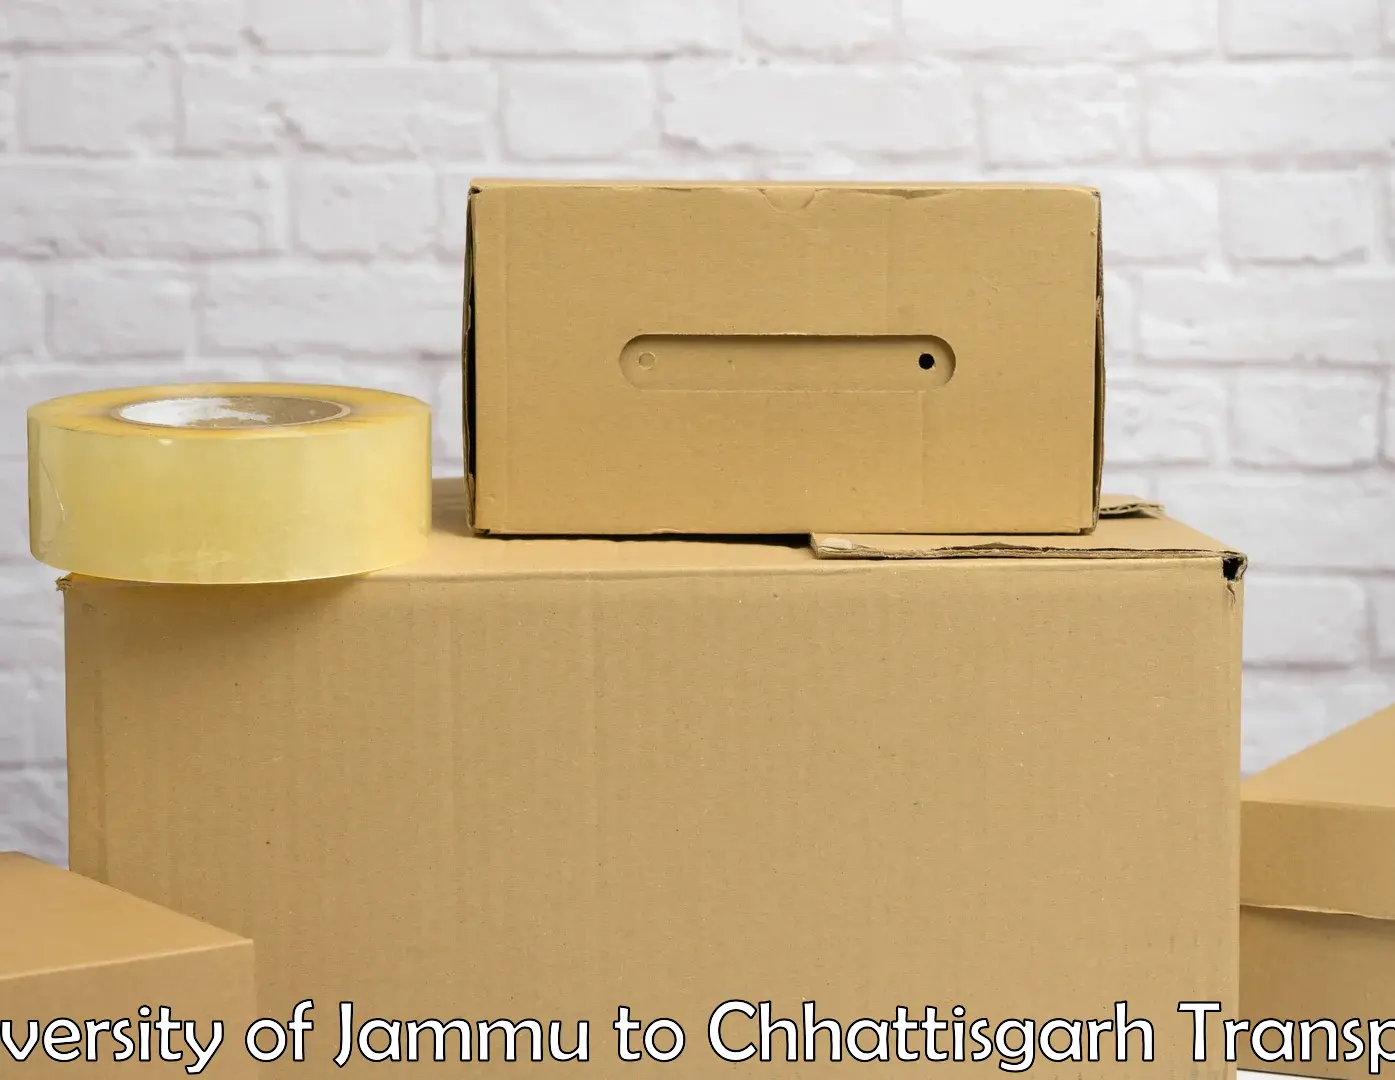 Container transportation services in University of Jammu to Raigarh